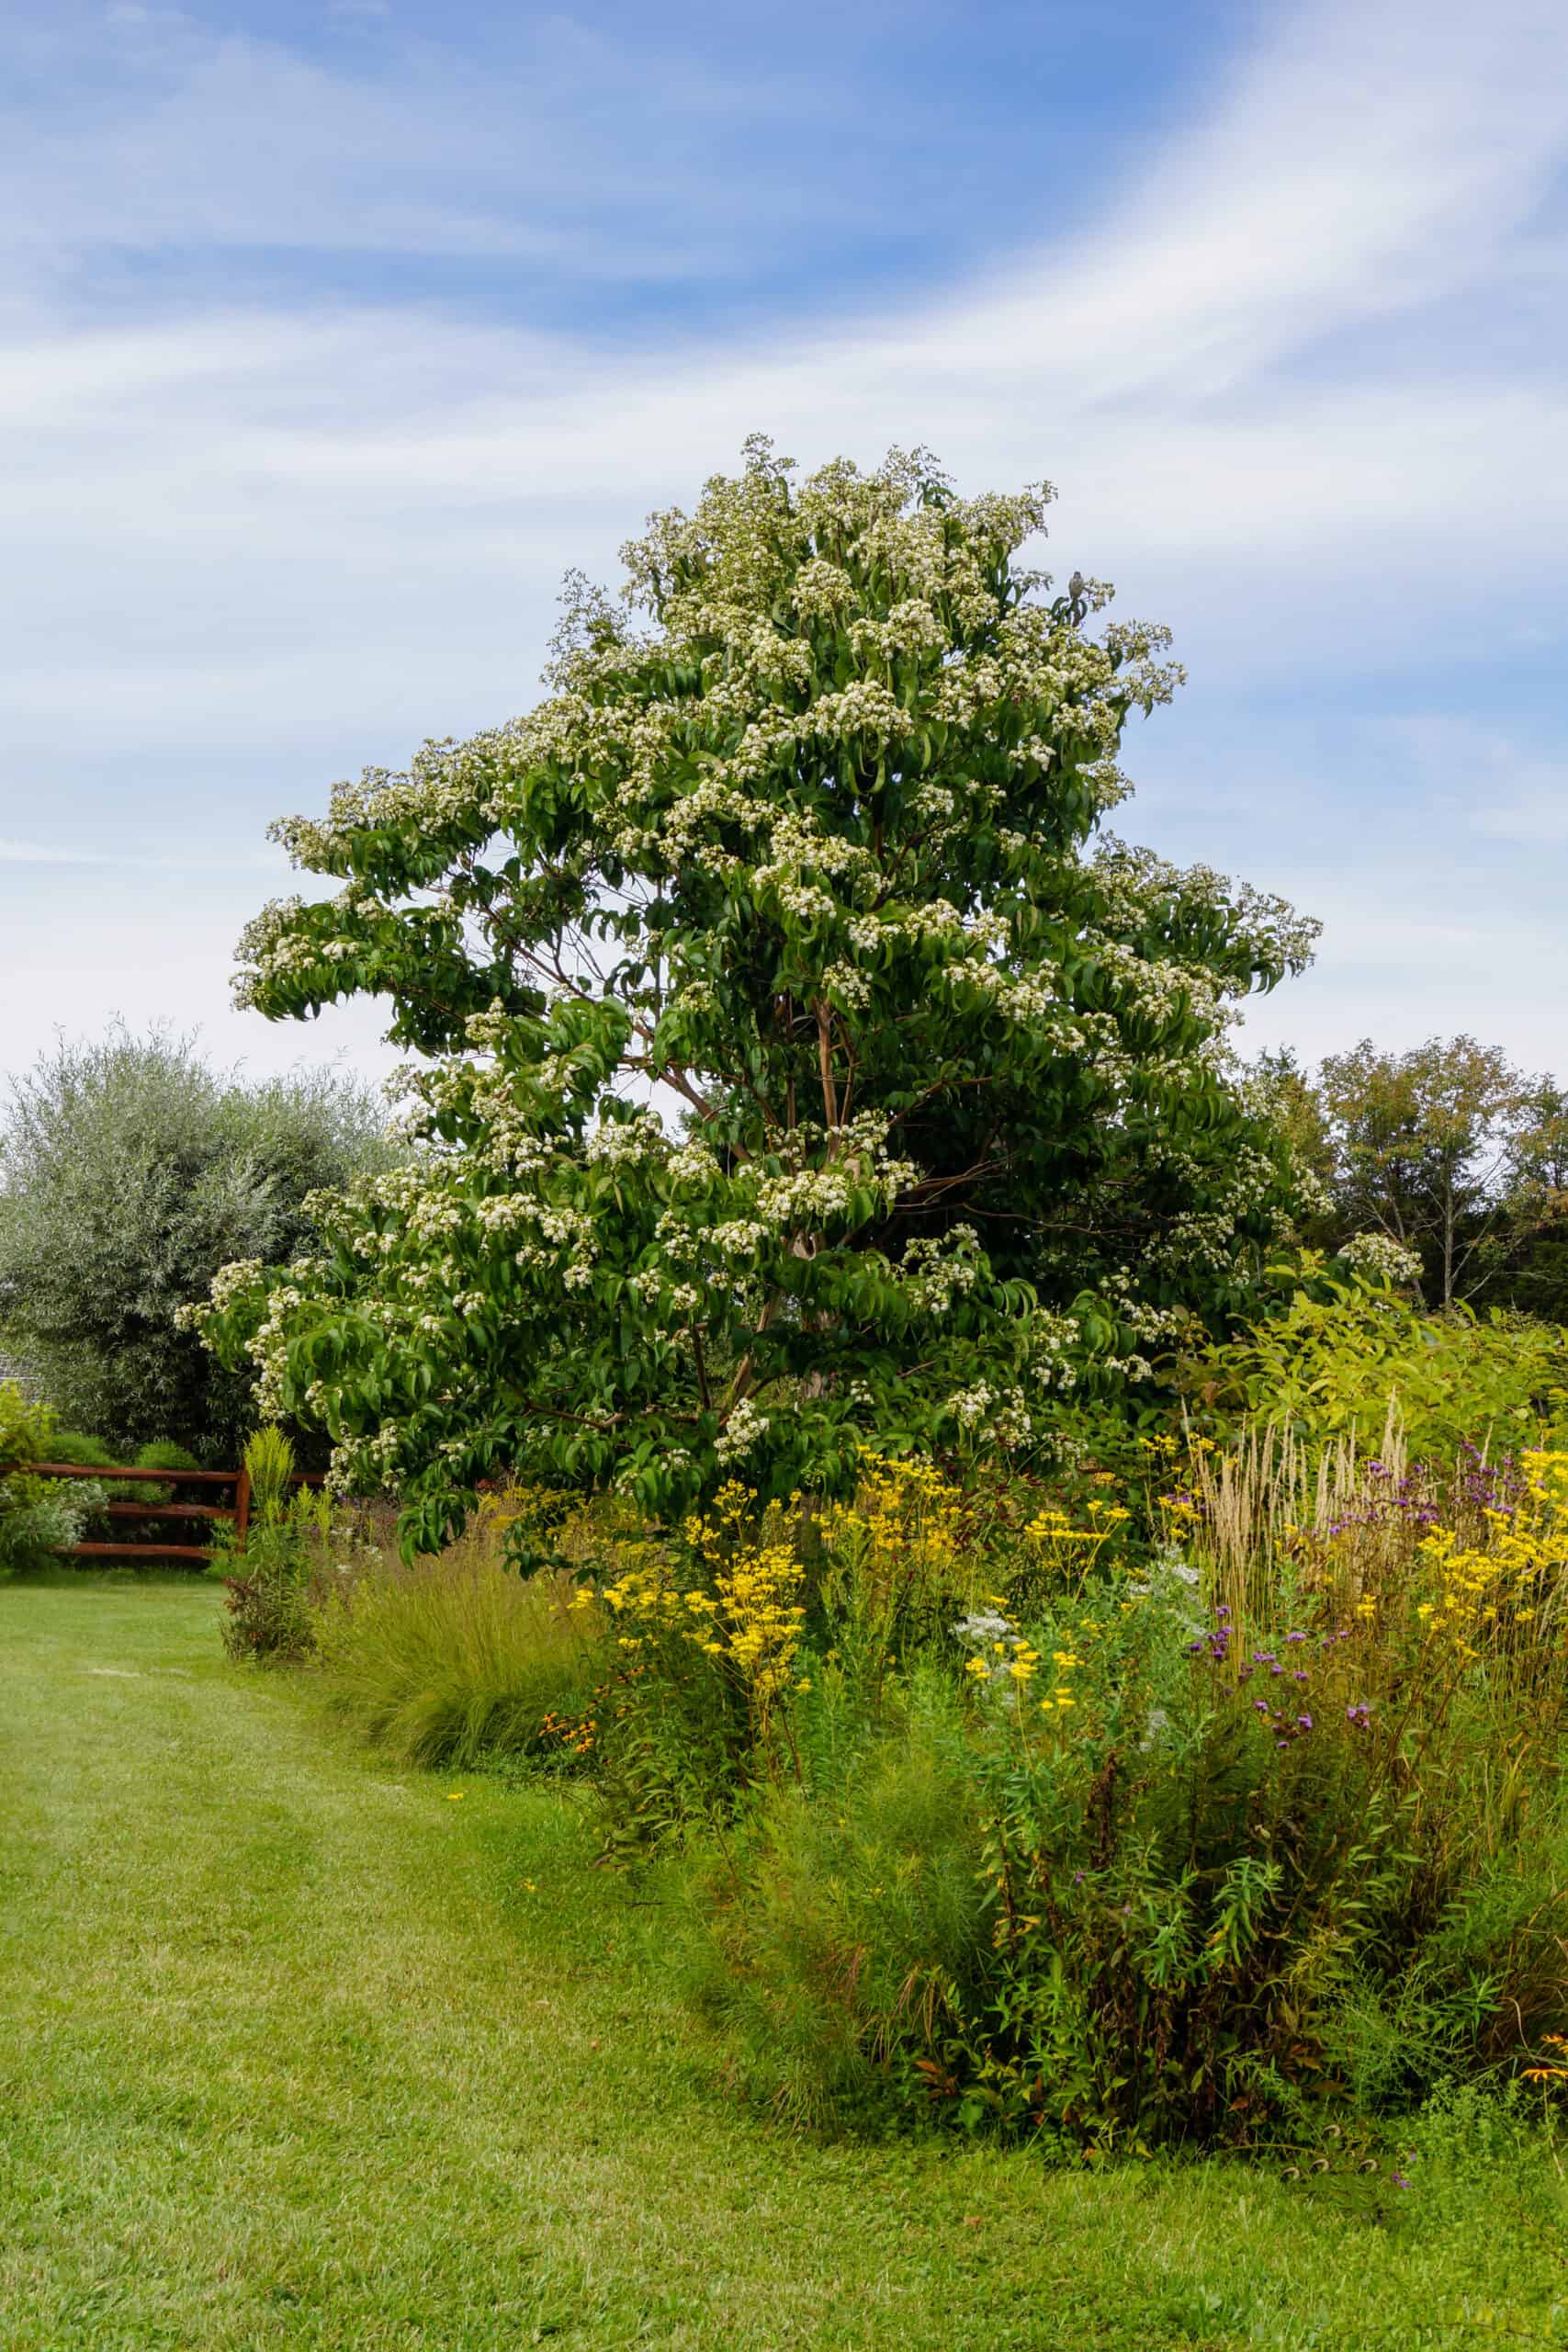 A heptacodium miconioides, also known as the seven son tree or seven sons tree, standing tall in a spacious field.